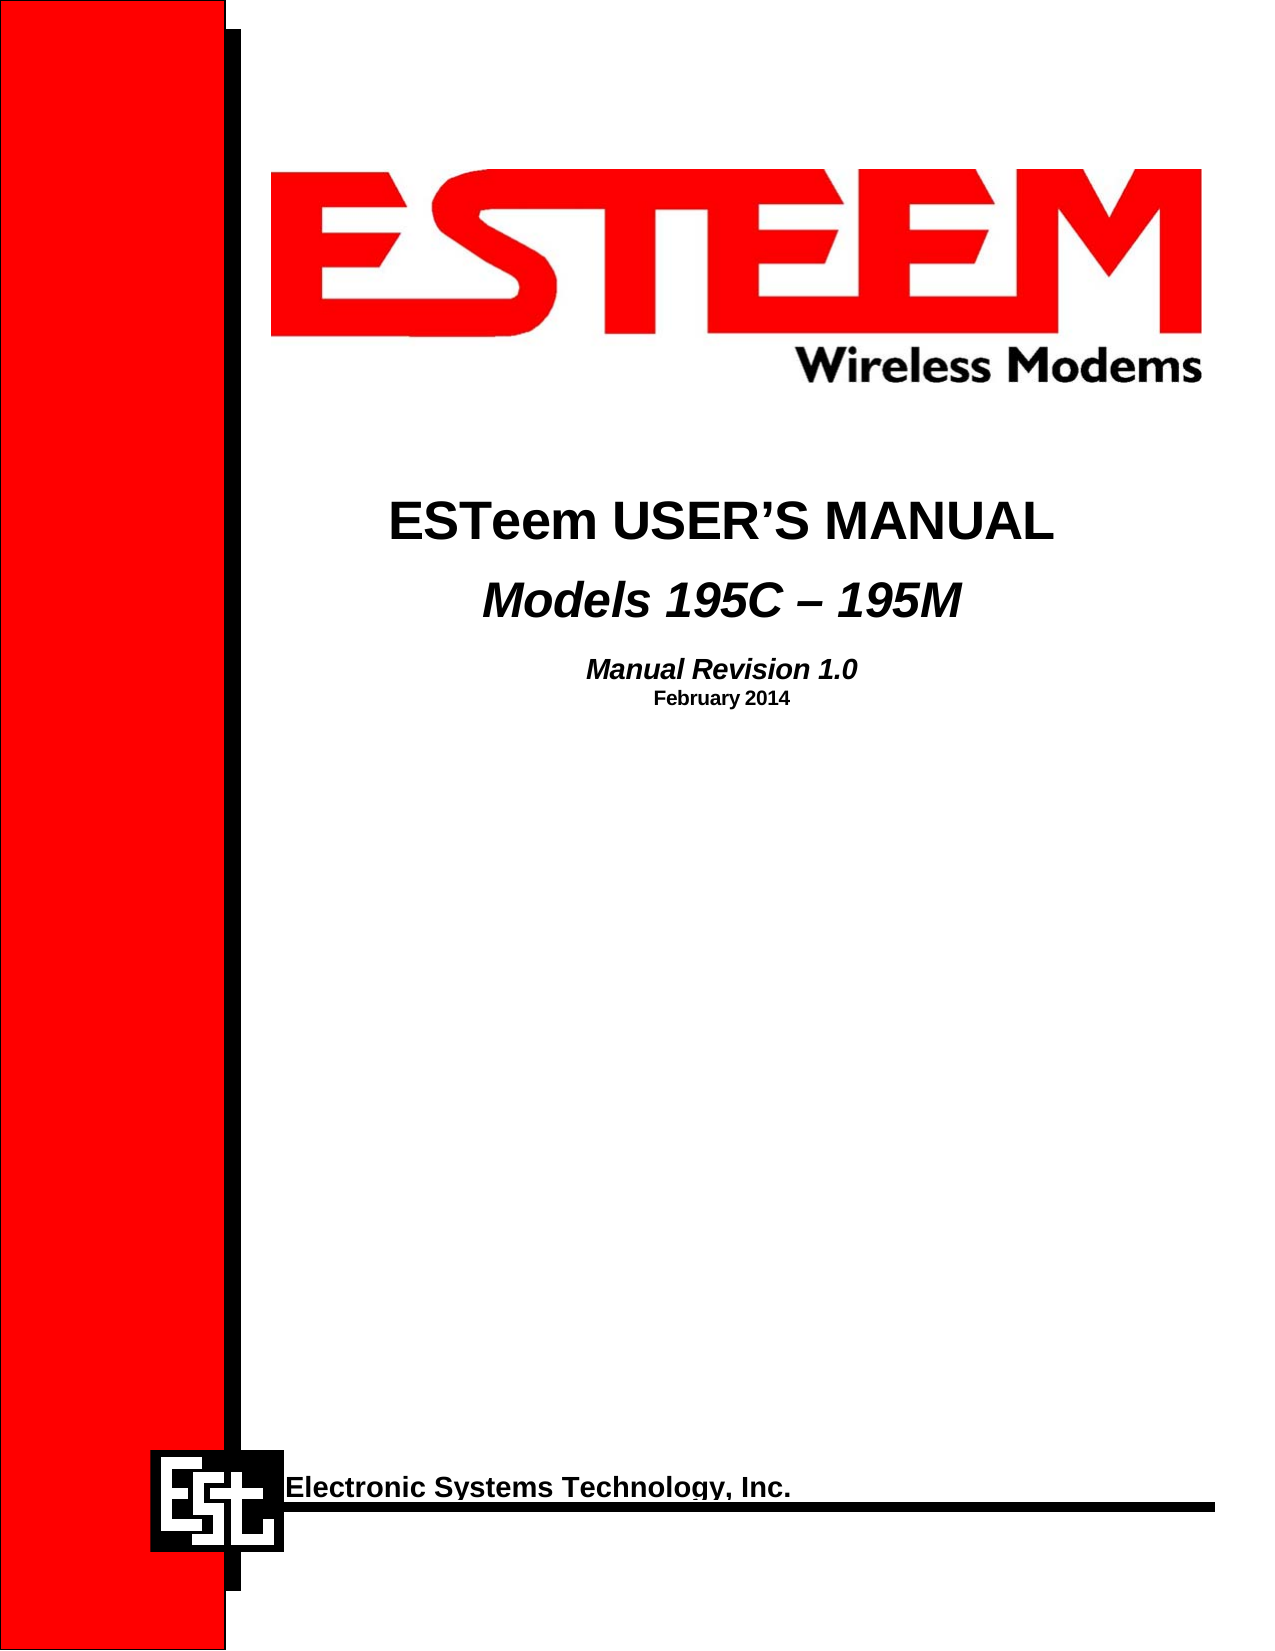                 ESTeem USER’S MANUAL  Models 195C – 195M   Manual Revision 1.0 February 2014      Electronic Systems Technology, Inc.